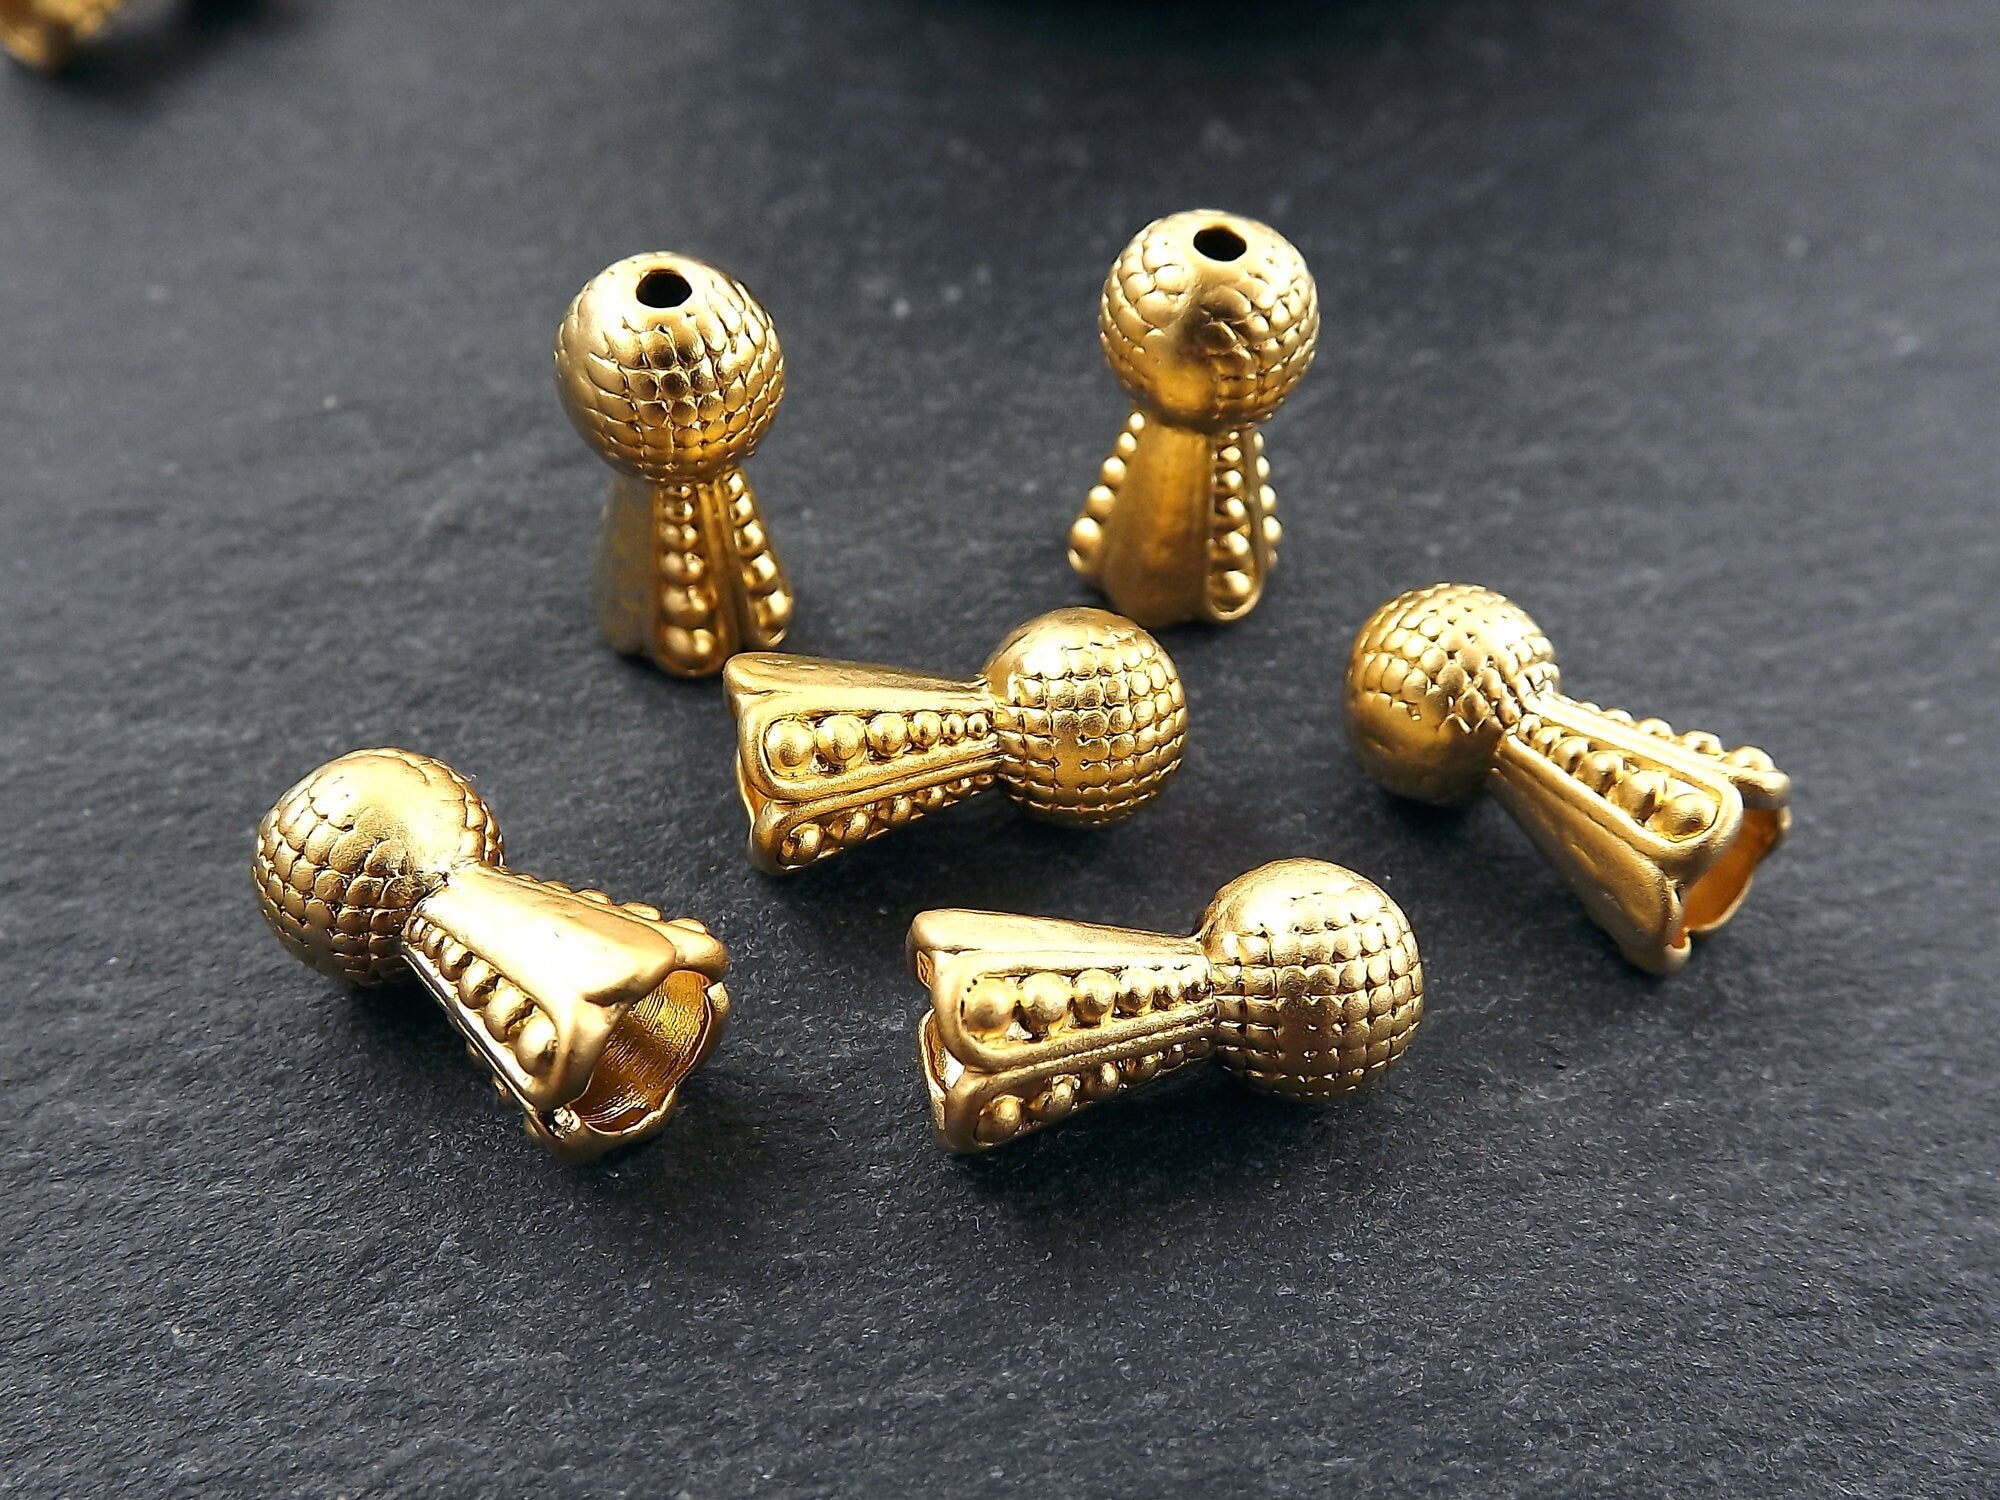 6 Dotted Ball Bead Caps, Bead End Tassels Caps, Ending Finding Component, Gold Bead Cap, 22k Matte Gold Plated Brass, 6pc